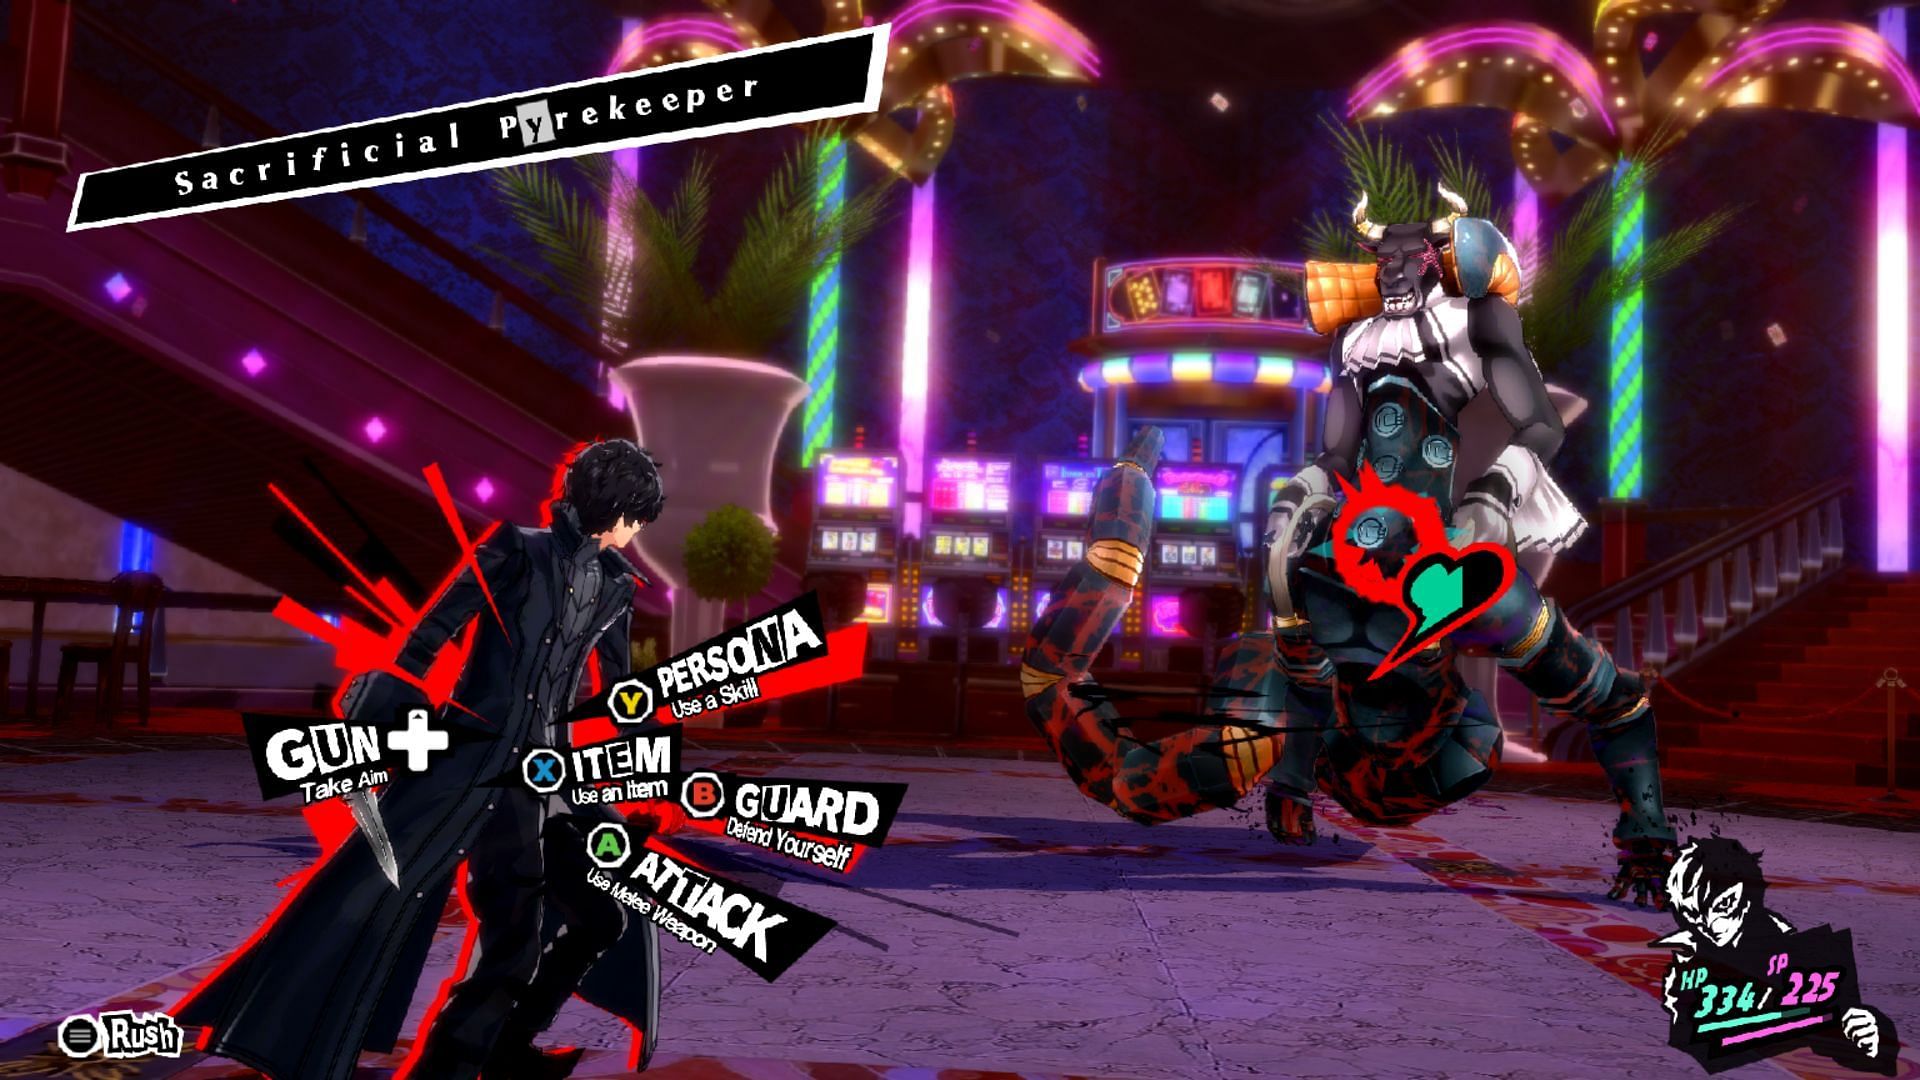 There are many monstrosities to fight (Image via Persona 5 Royal)